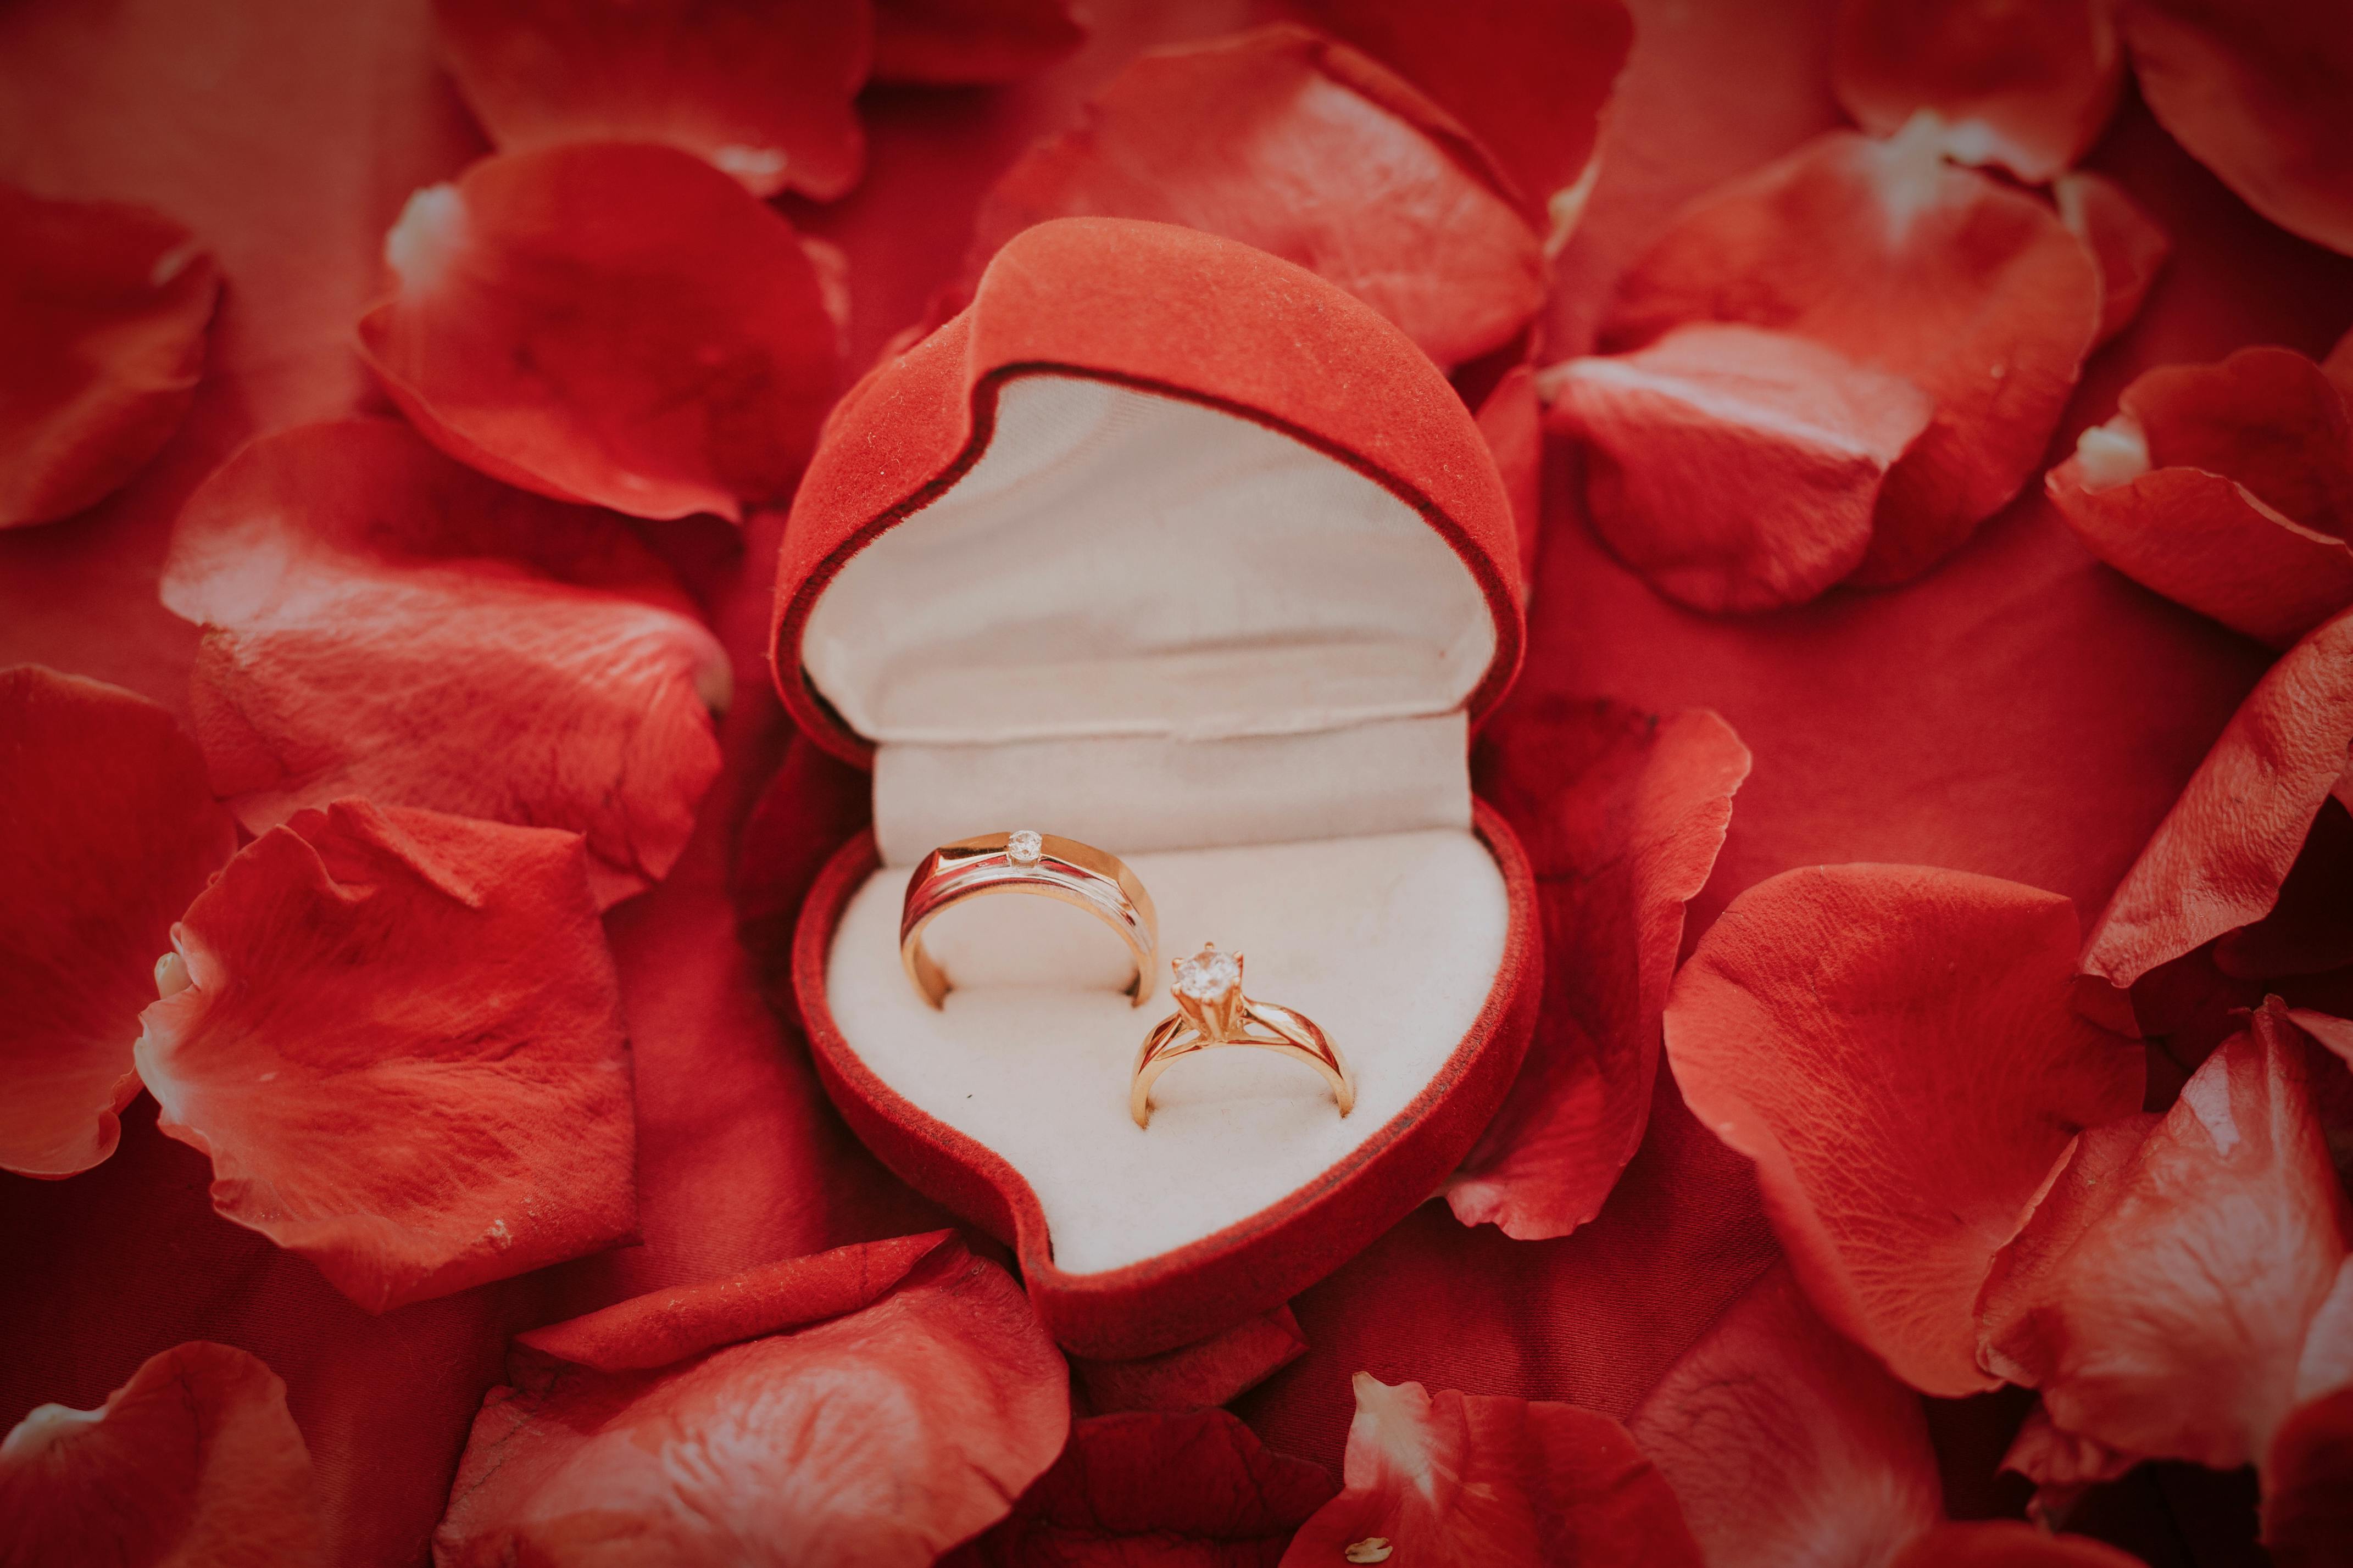 Wedding rings in a box surrounded by flower petals | Source: Pexels